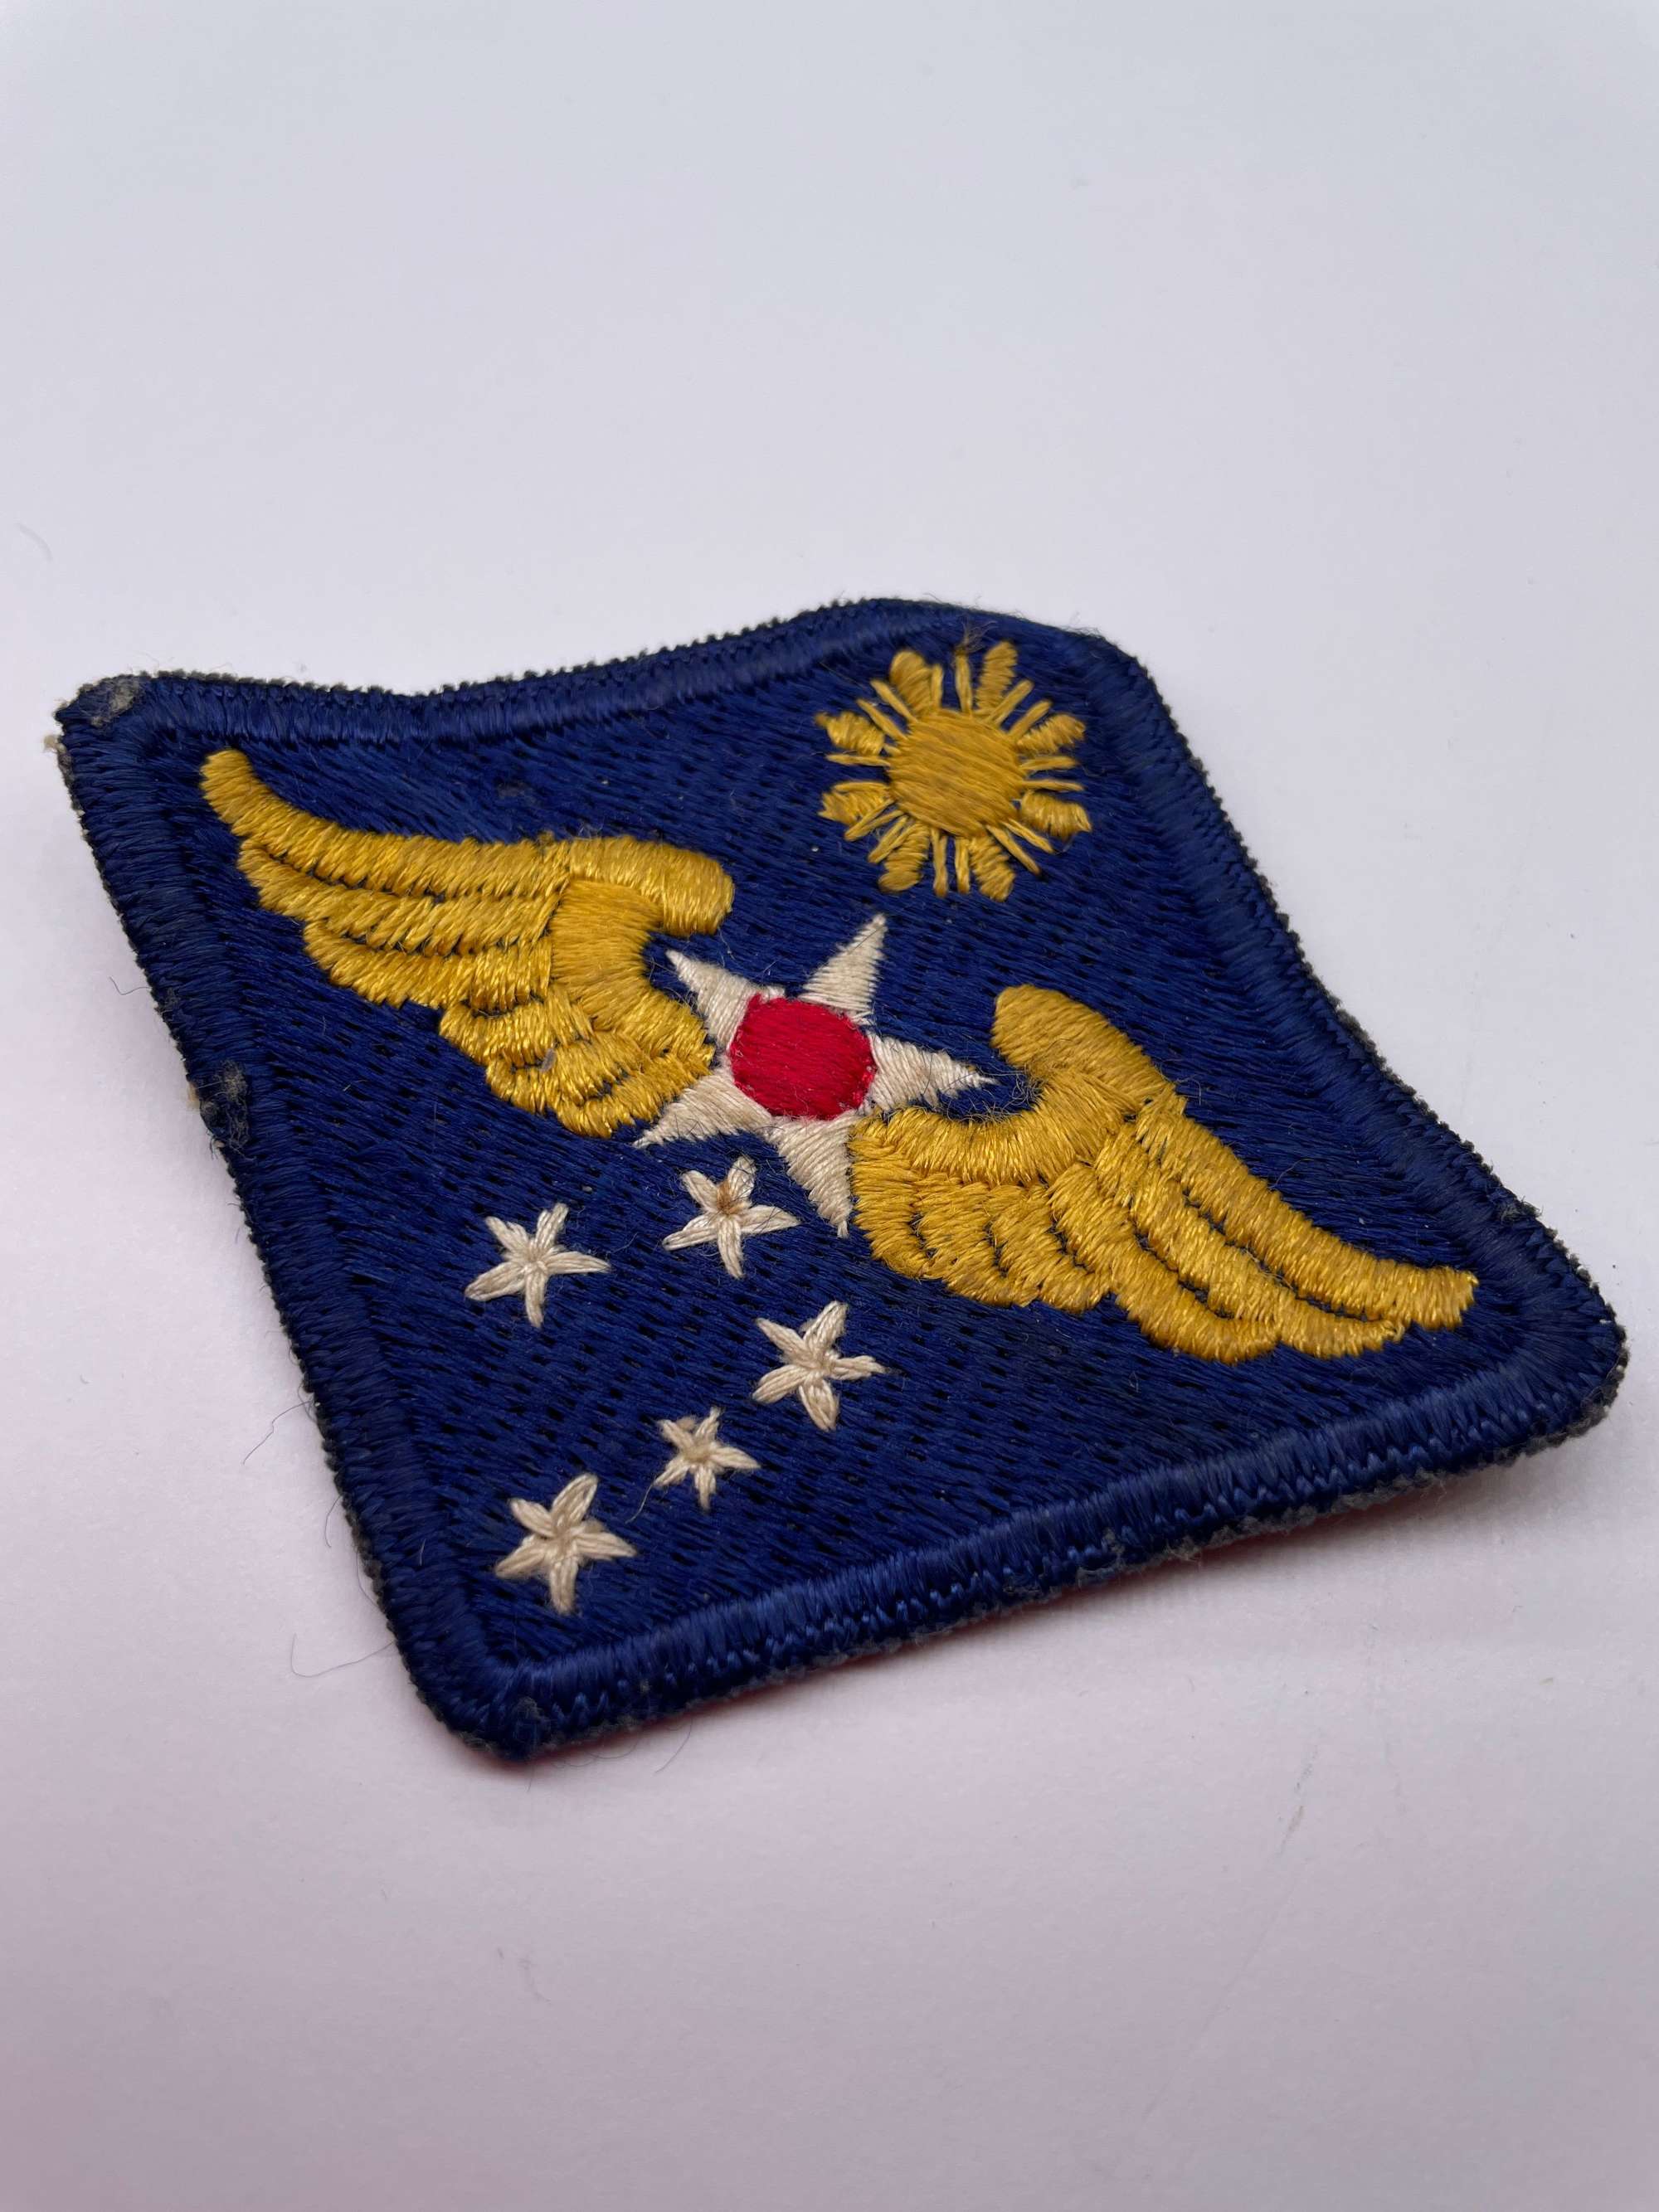 Original World War Two US Army Air Force Far East Command Patch